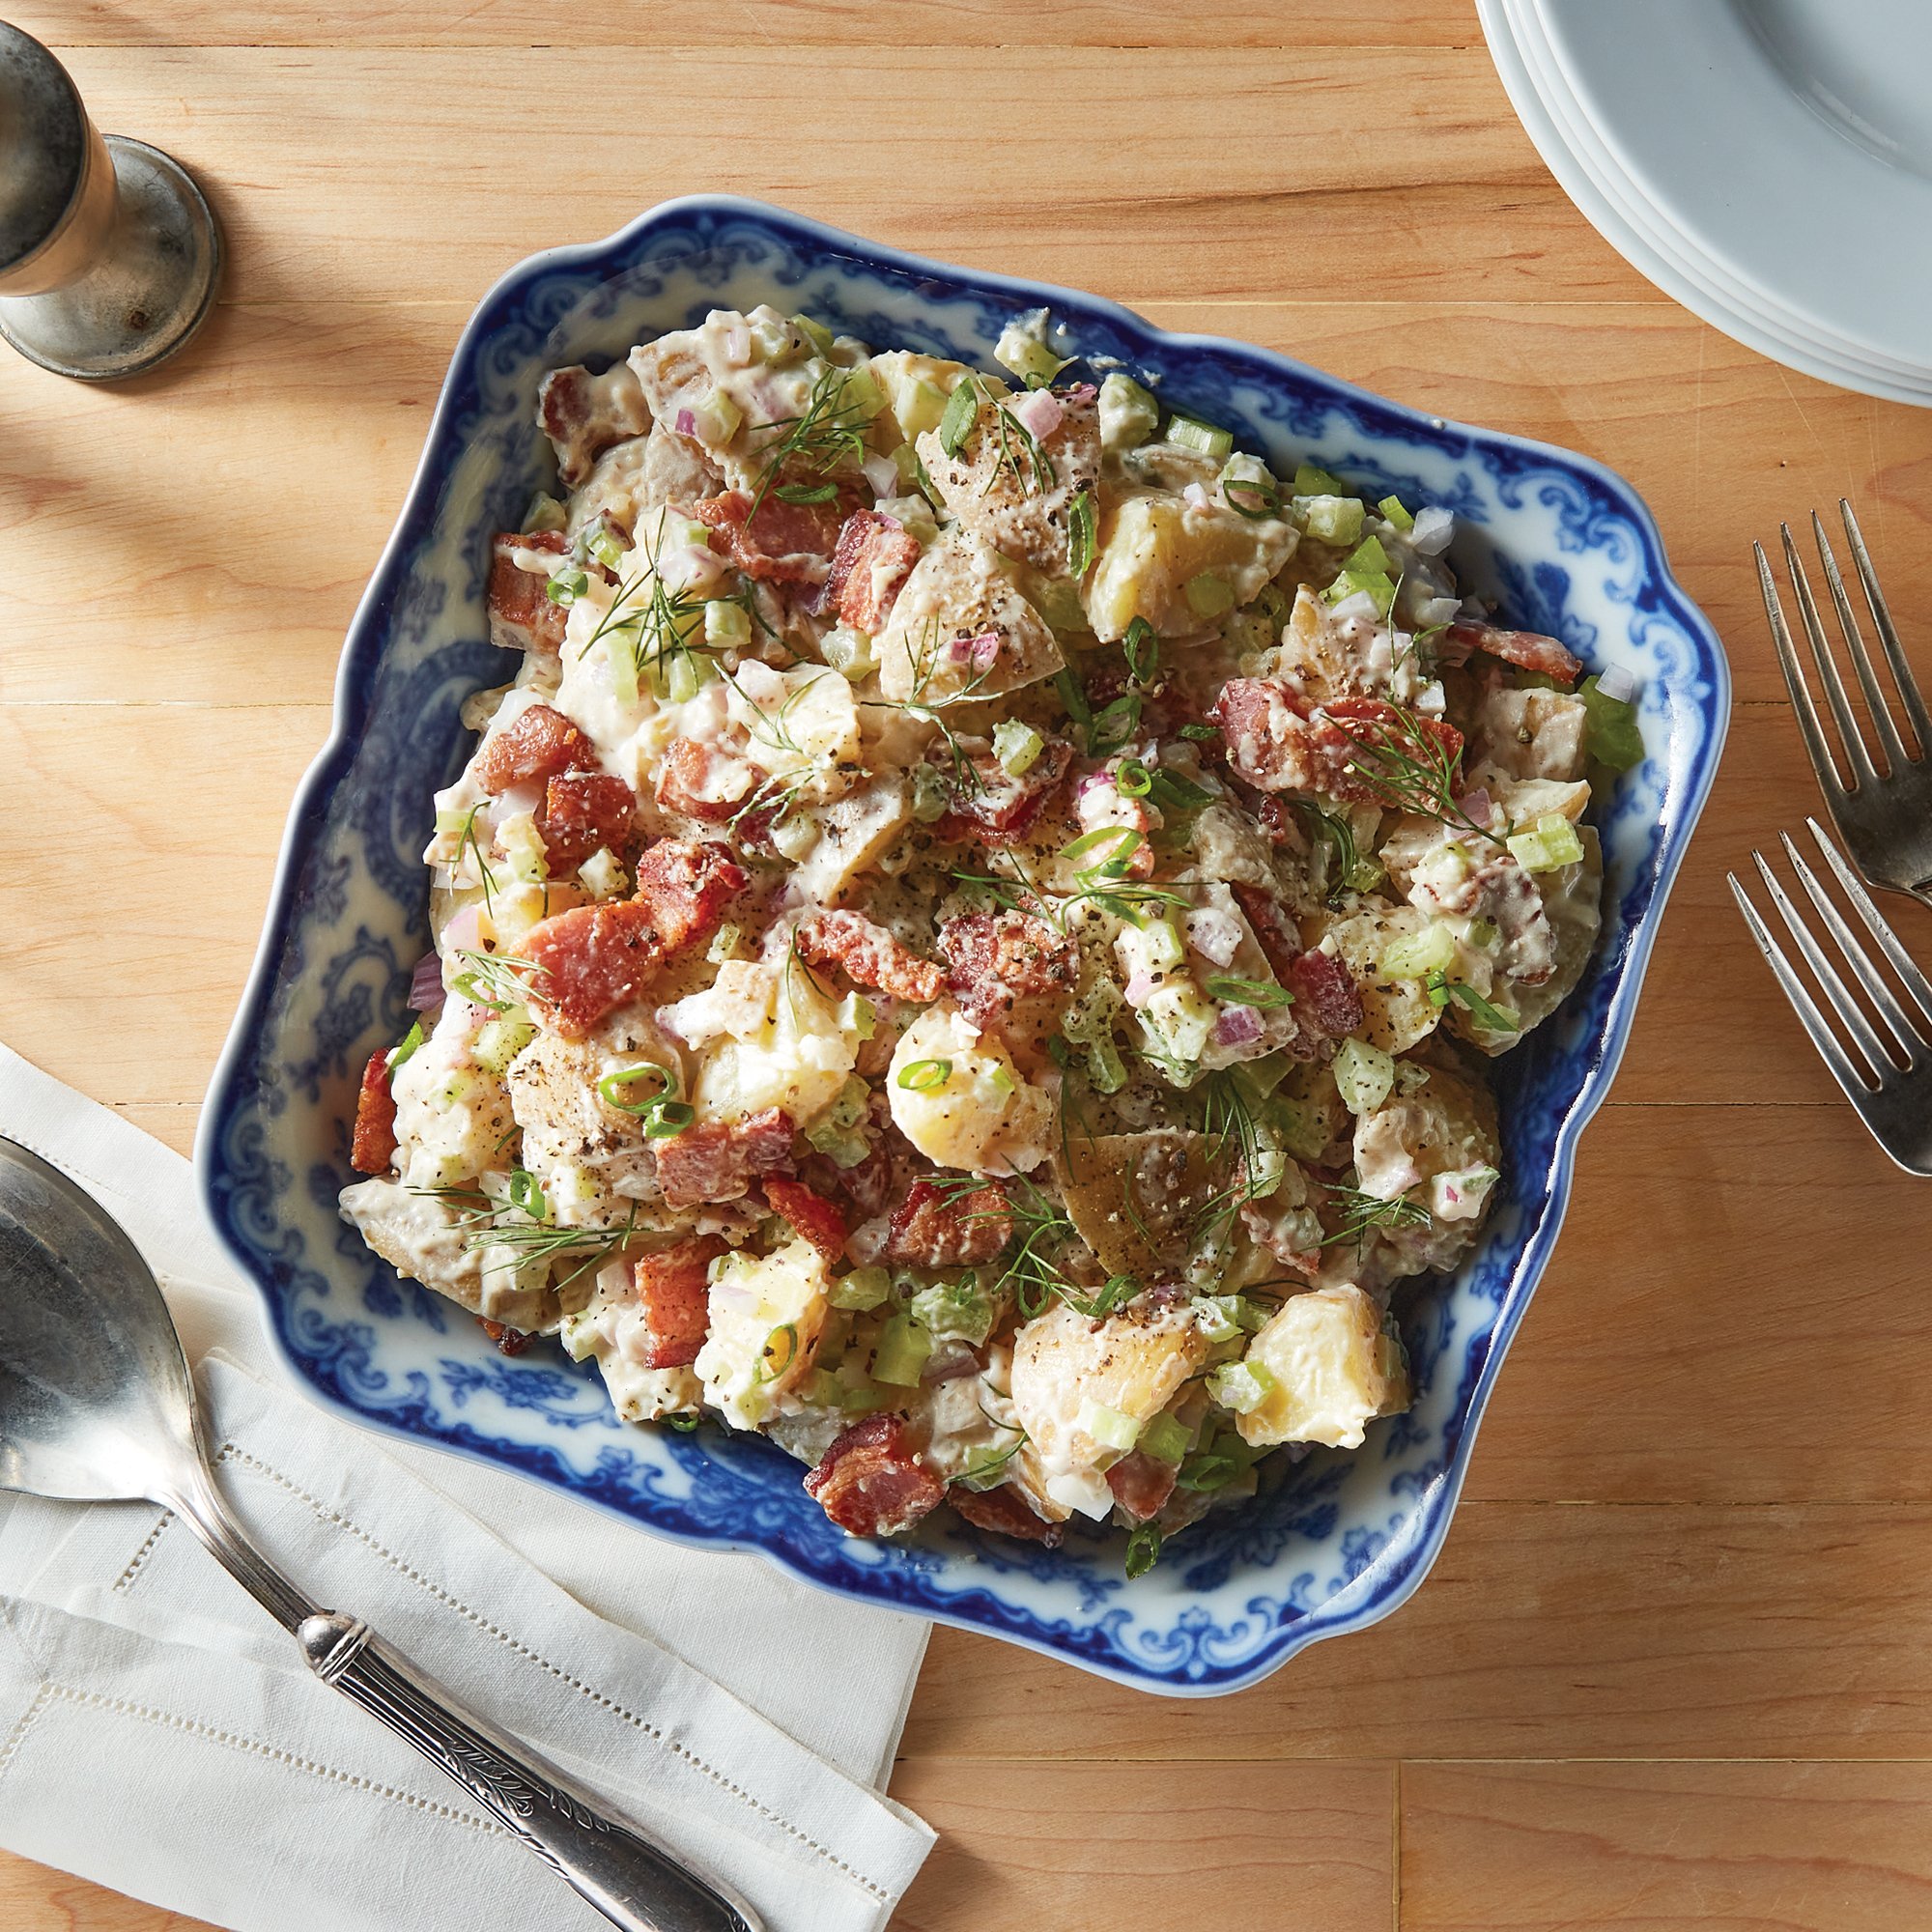 Sour Cream Potato Salad With Bacon And Green Onions Recipe From H E B